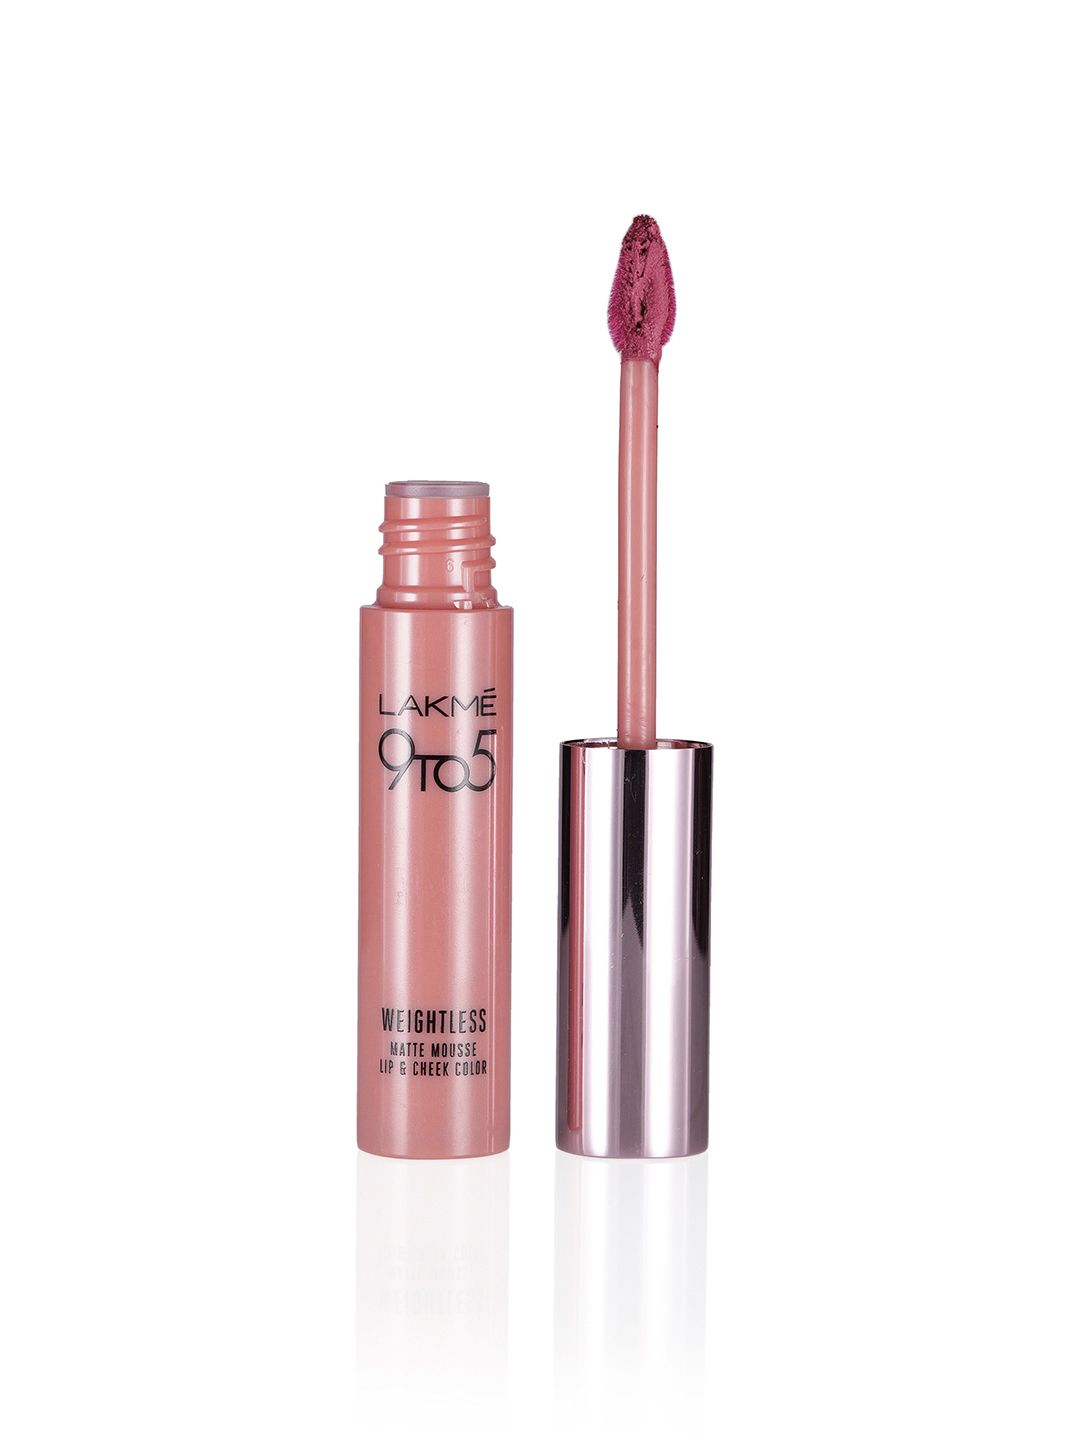 Lakme 9 to 5 Weightless Mousse Lip & Cheek Color - Pink Lace Price in India